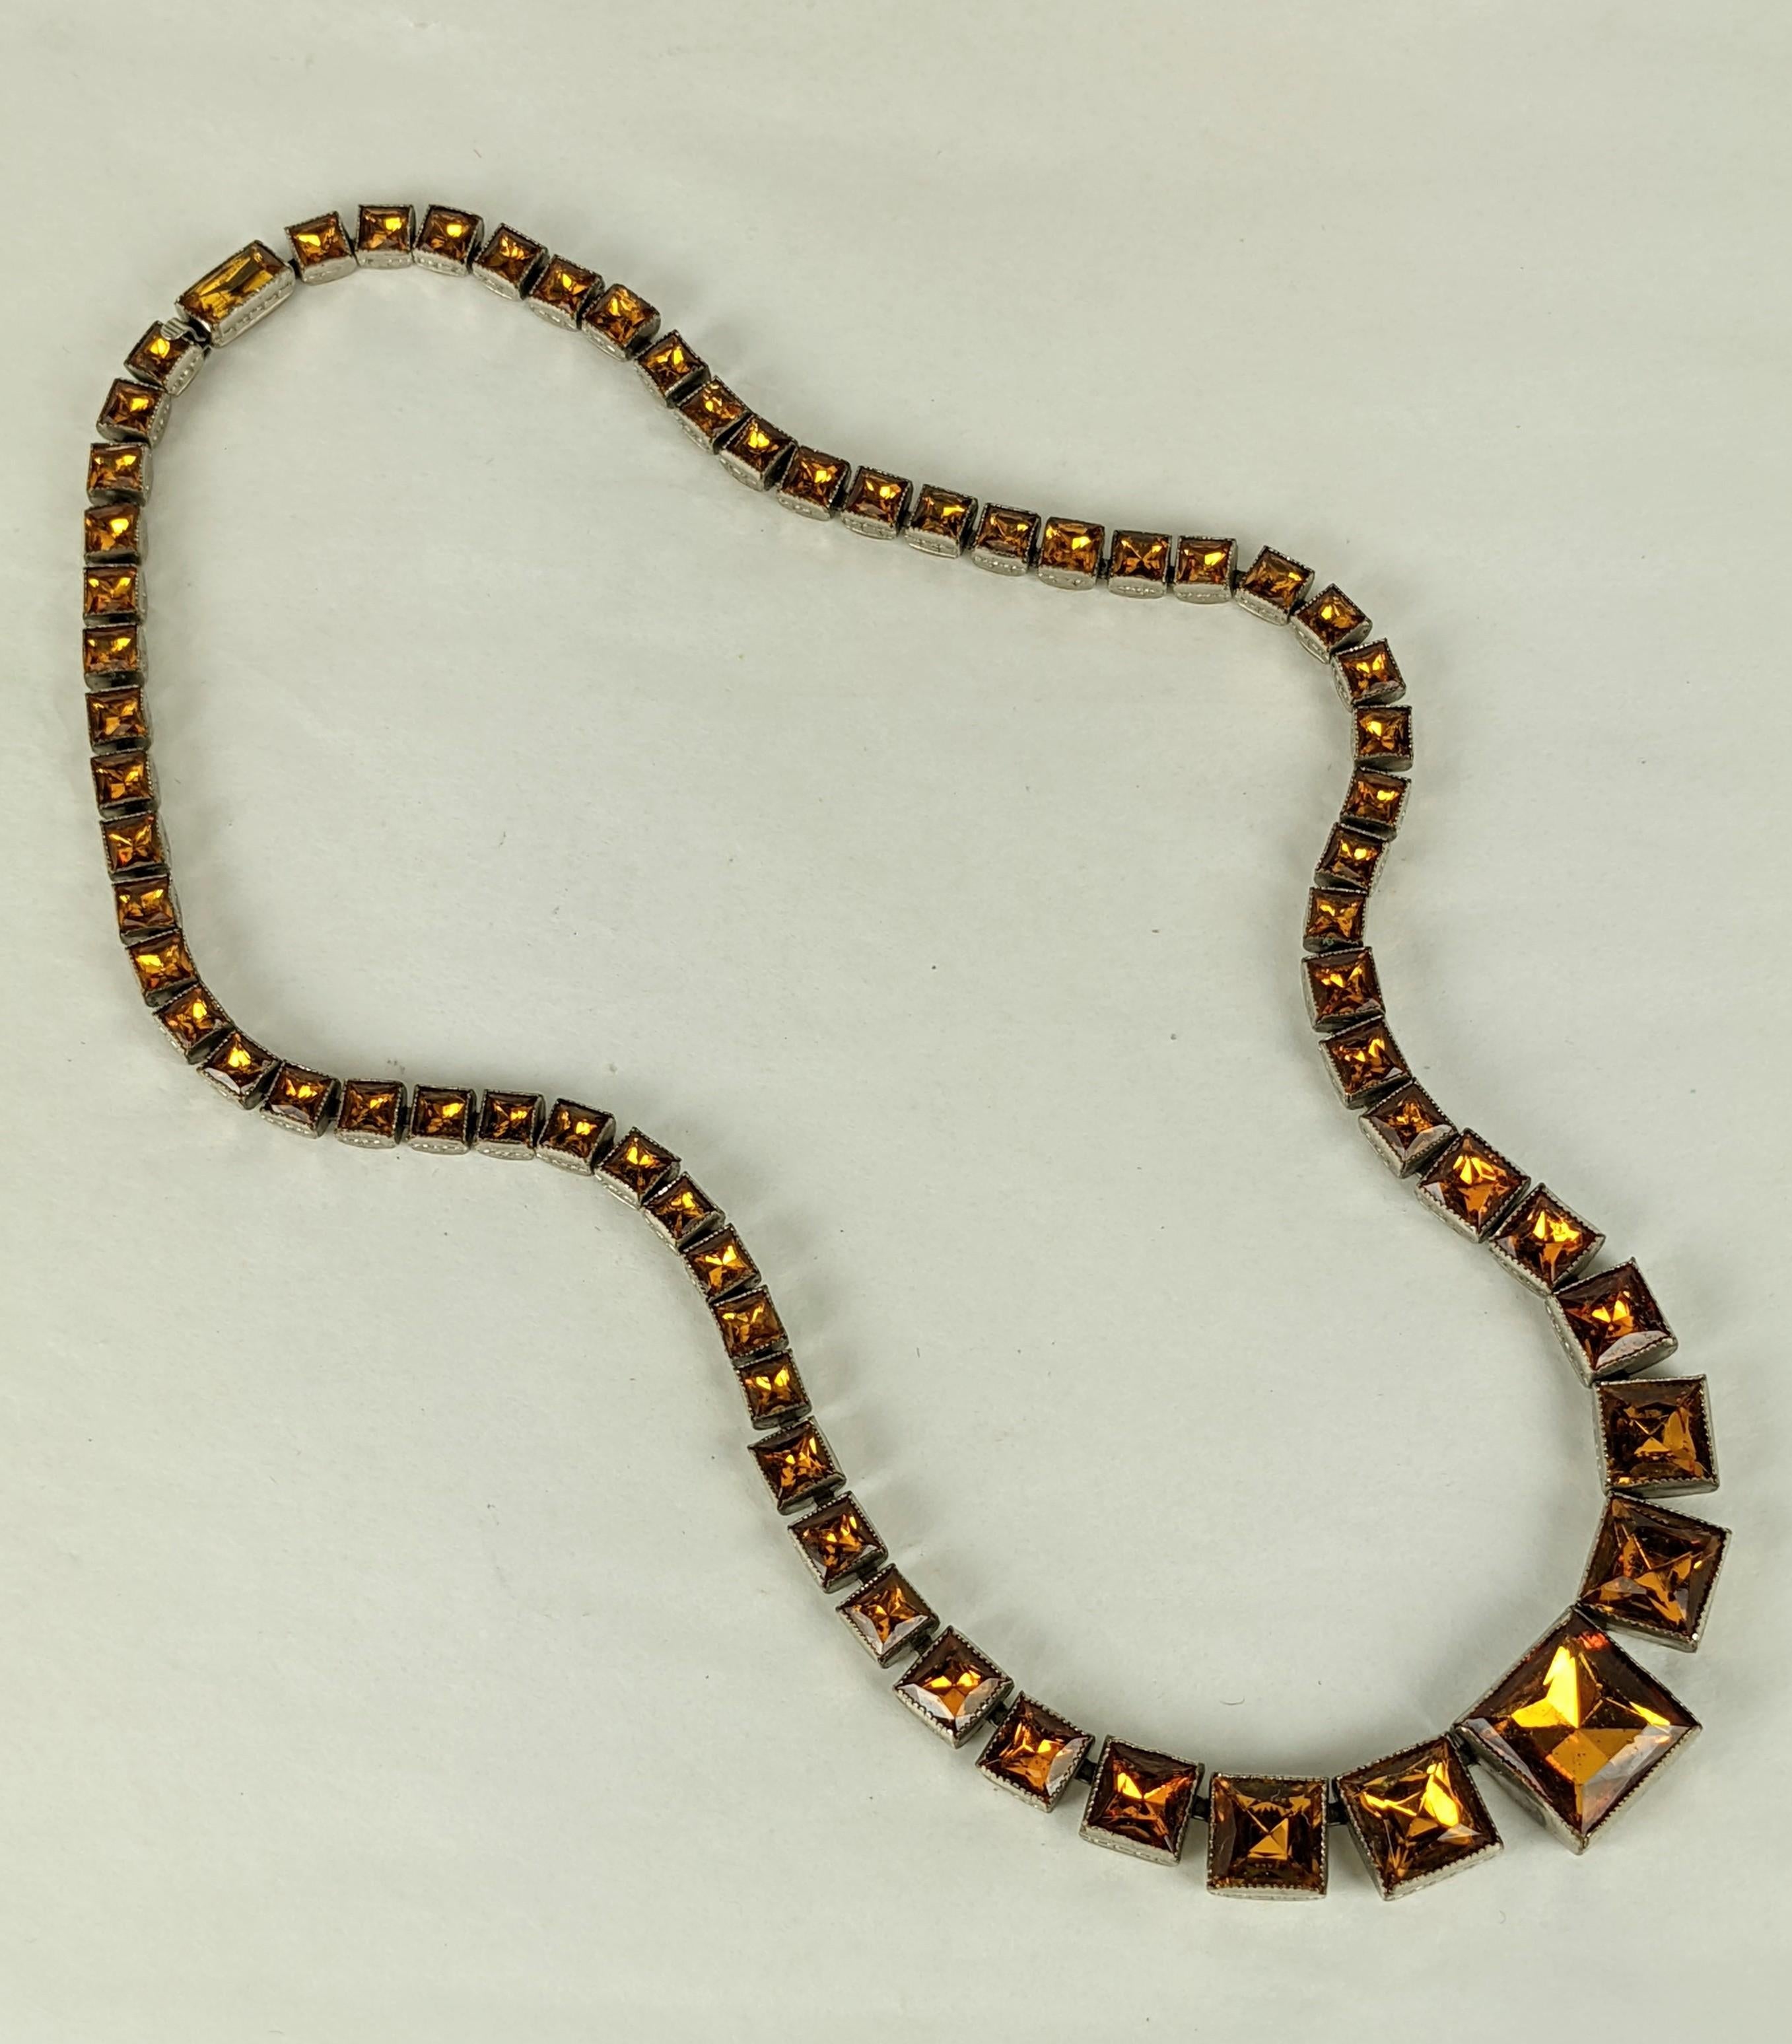 Elegant Art Deco Czecholovakian Graduate Paste Necklace from the 1930's. Flexible square settings graduate to largest topaz paste at center. Silverplated. Engraved florals on backs. Signed 